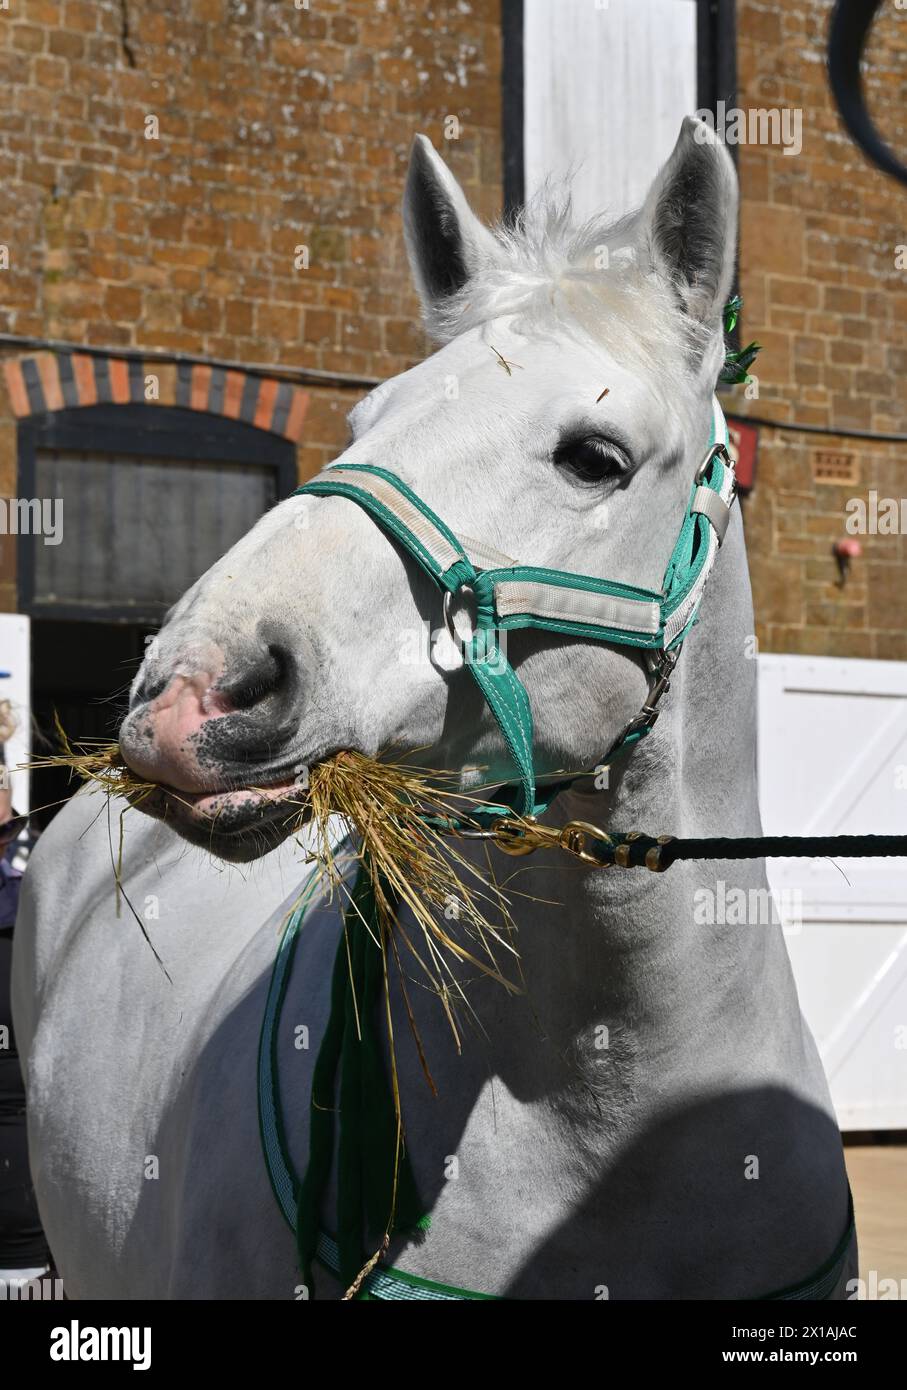 A British Percheron mare photographed at Hook Norton Brewery, Oxfordshire during a heavy horse workshop laid on by the brewery. Stock Photo